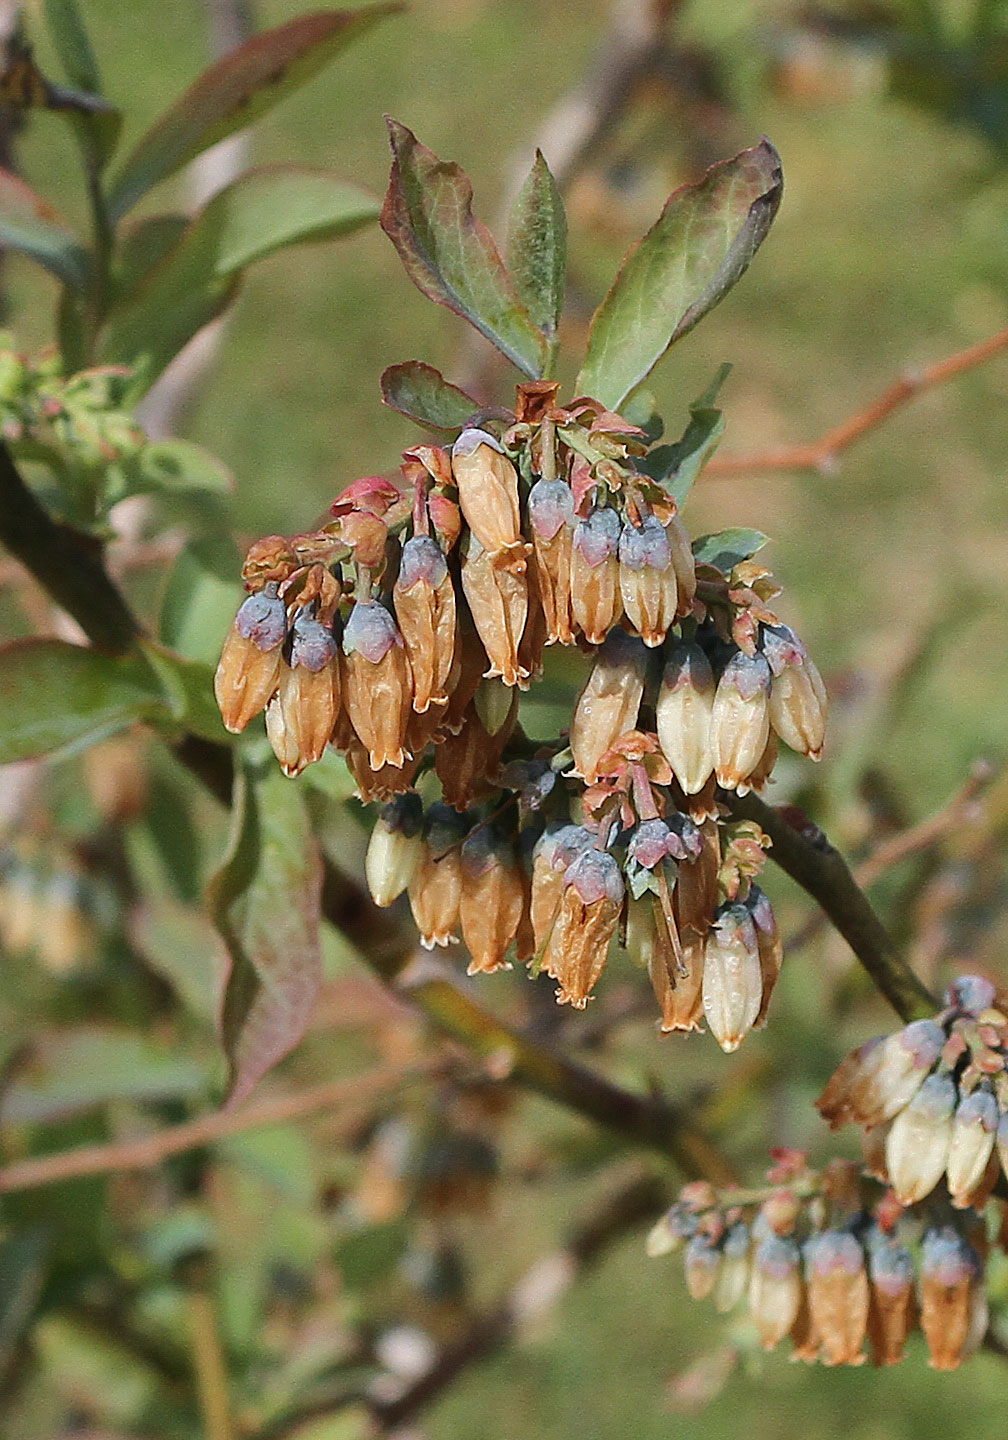 Blueberry blooms damaged by the April 6th freeze. Photo by Debbie Roos.